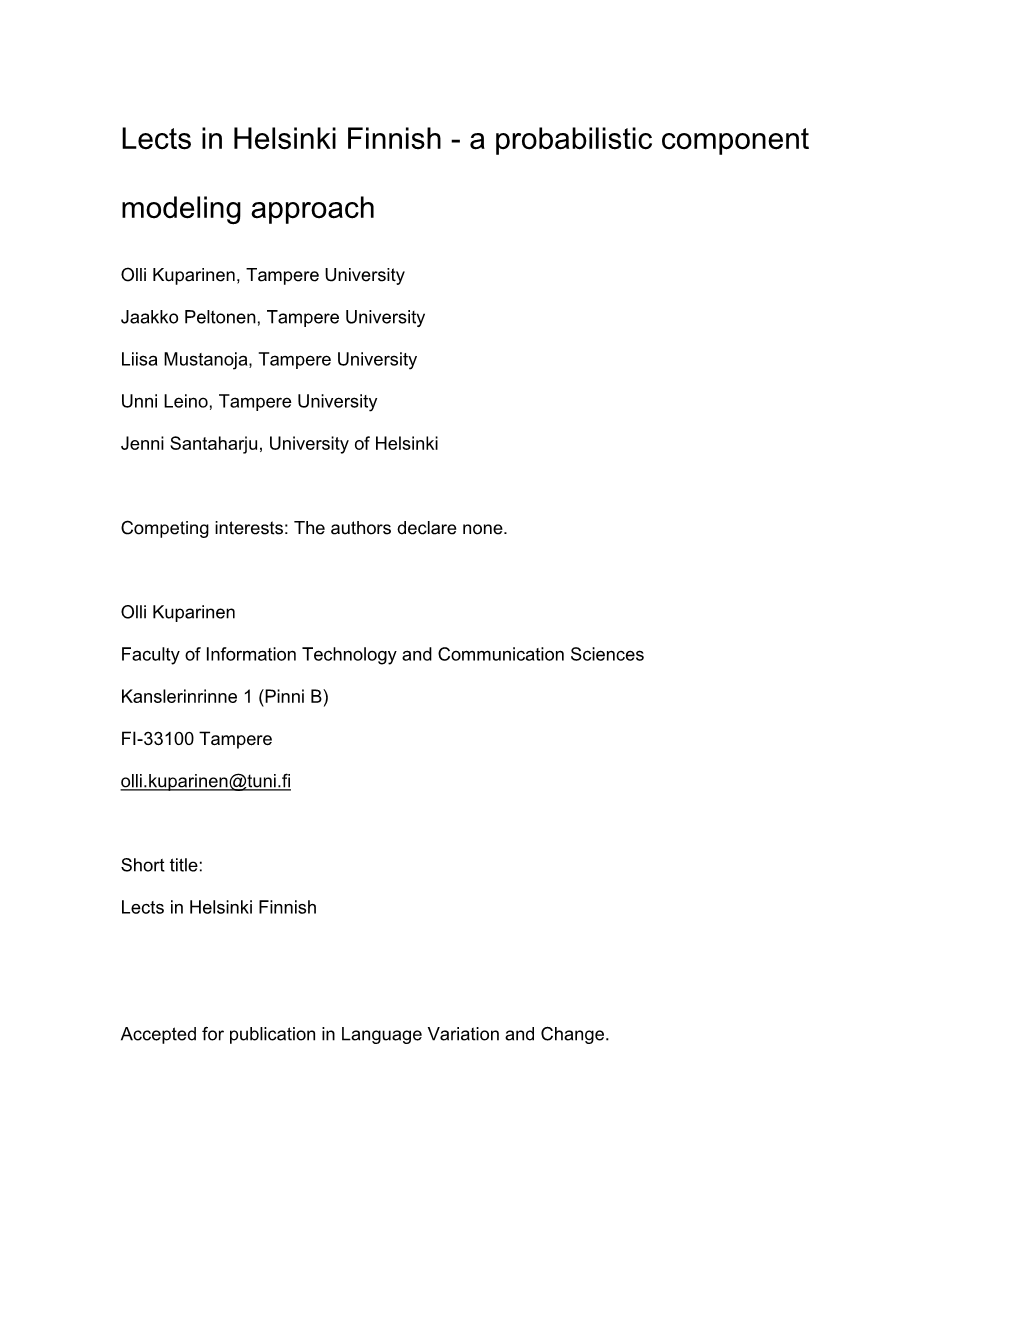 Lects in Helsinki Finnish - a Probabilistic Component Modeling Approach